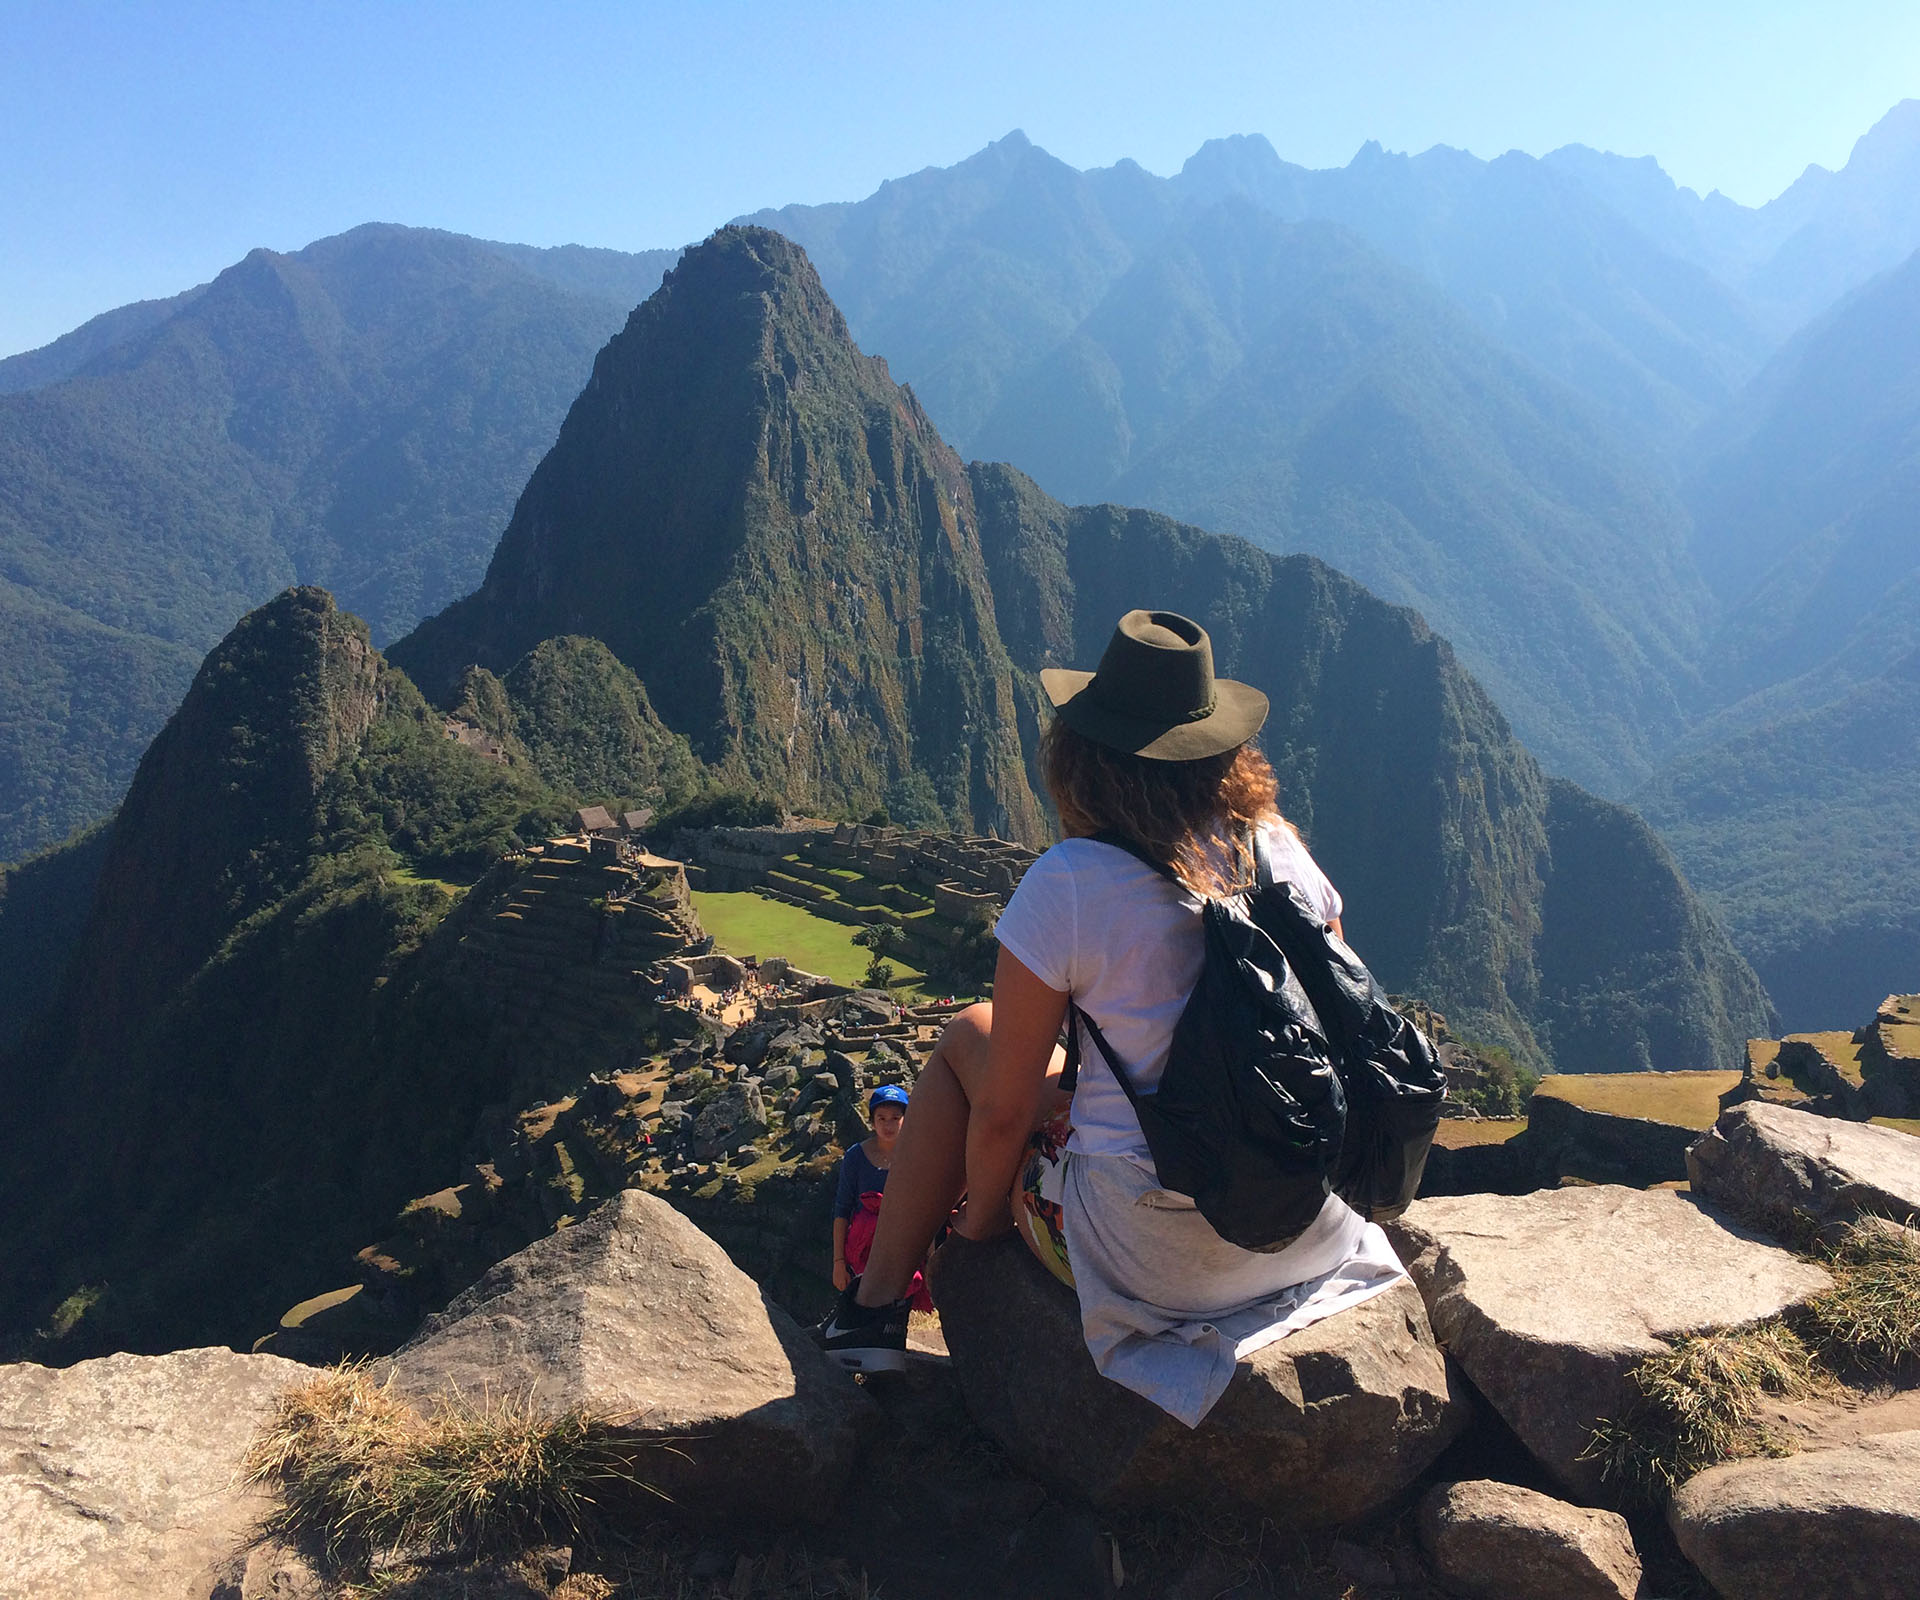 5 unexpected things we learned in Peru